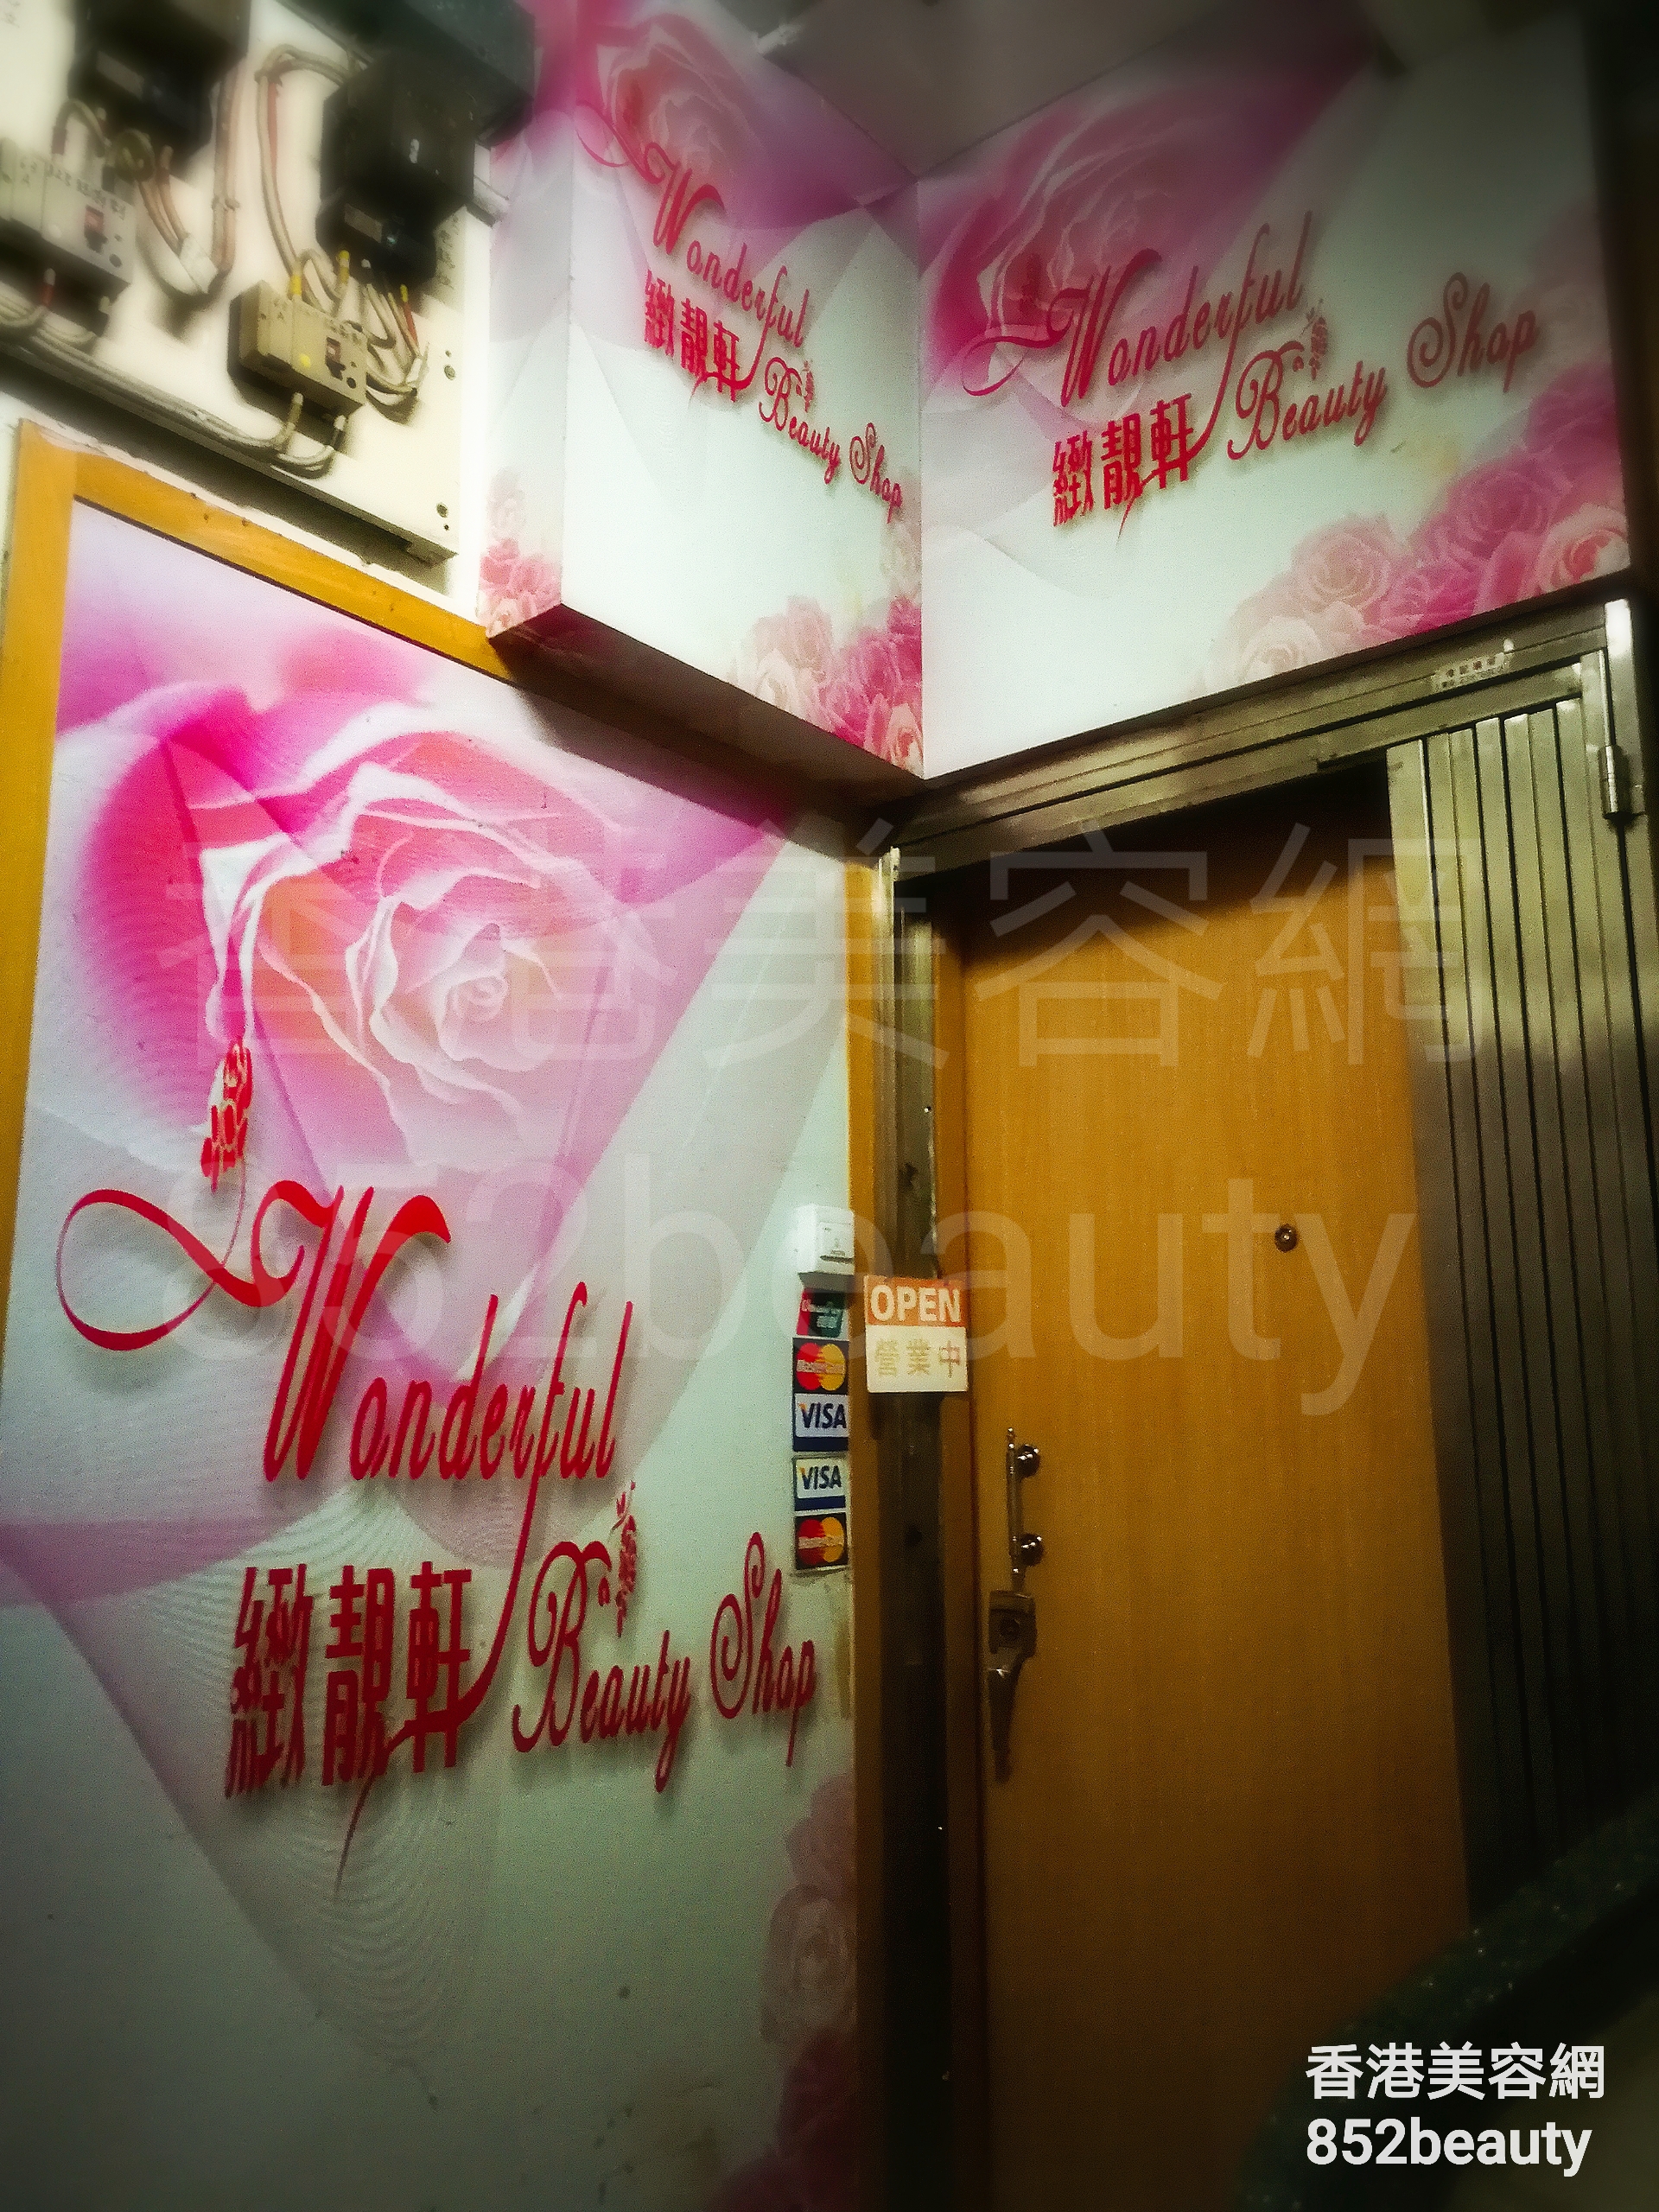 Hand and foot care: 緻靚軒 Wonderful Beauty Shop